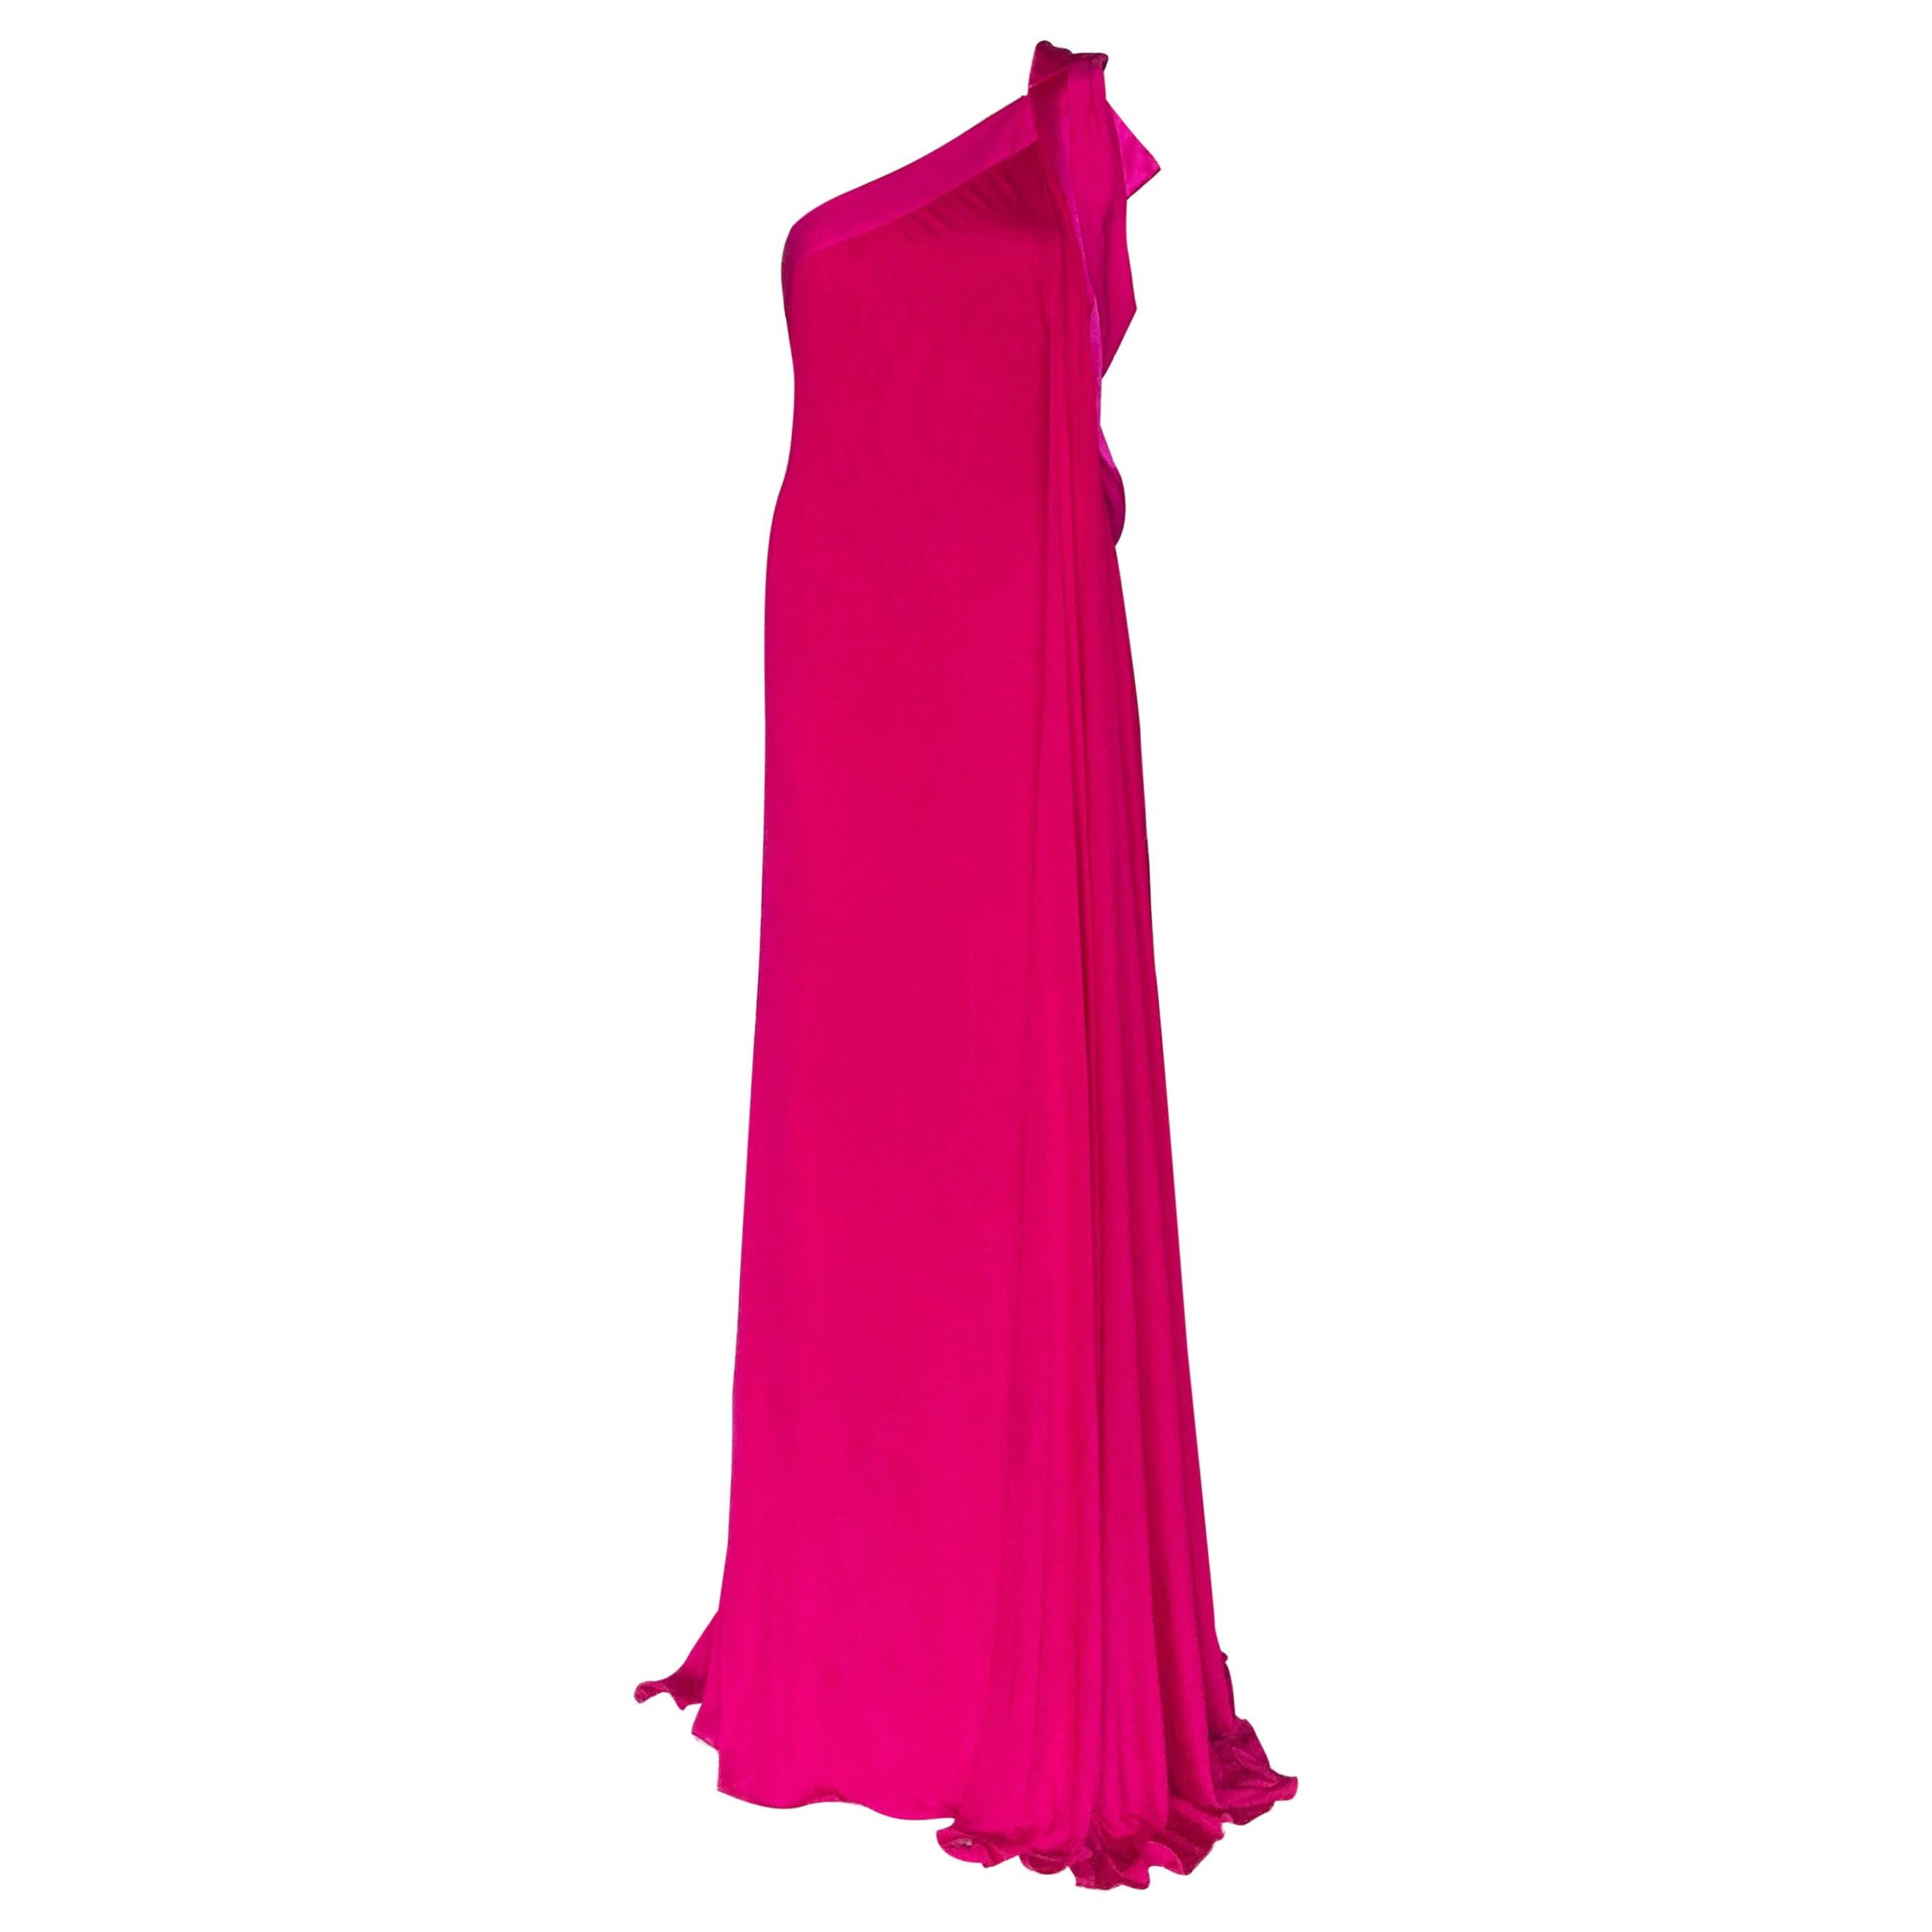 NEW VERSACE FUCHSIA SILK ONE SHOULDER OPEN BACK Gown 44 - 8 For Sale